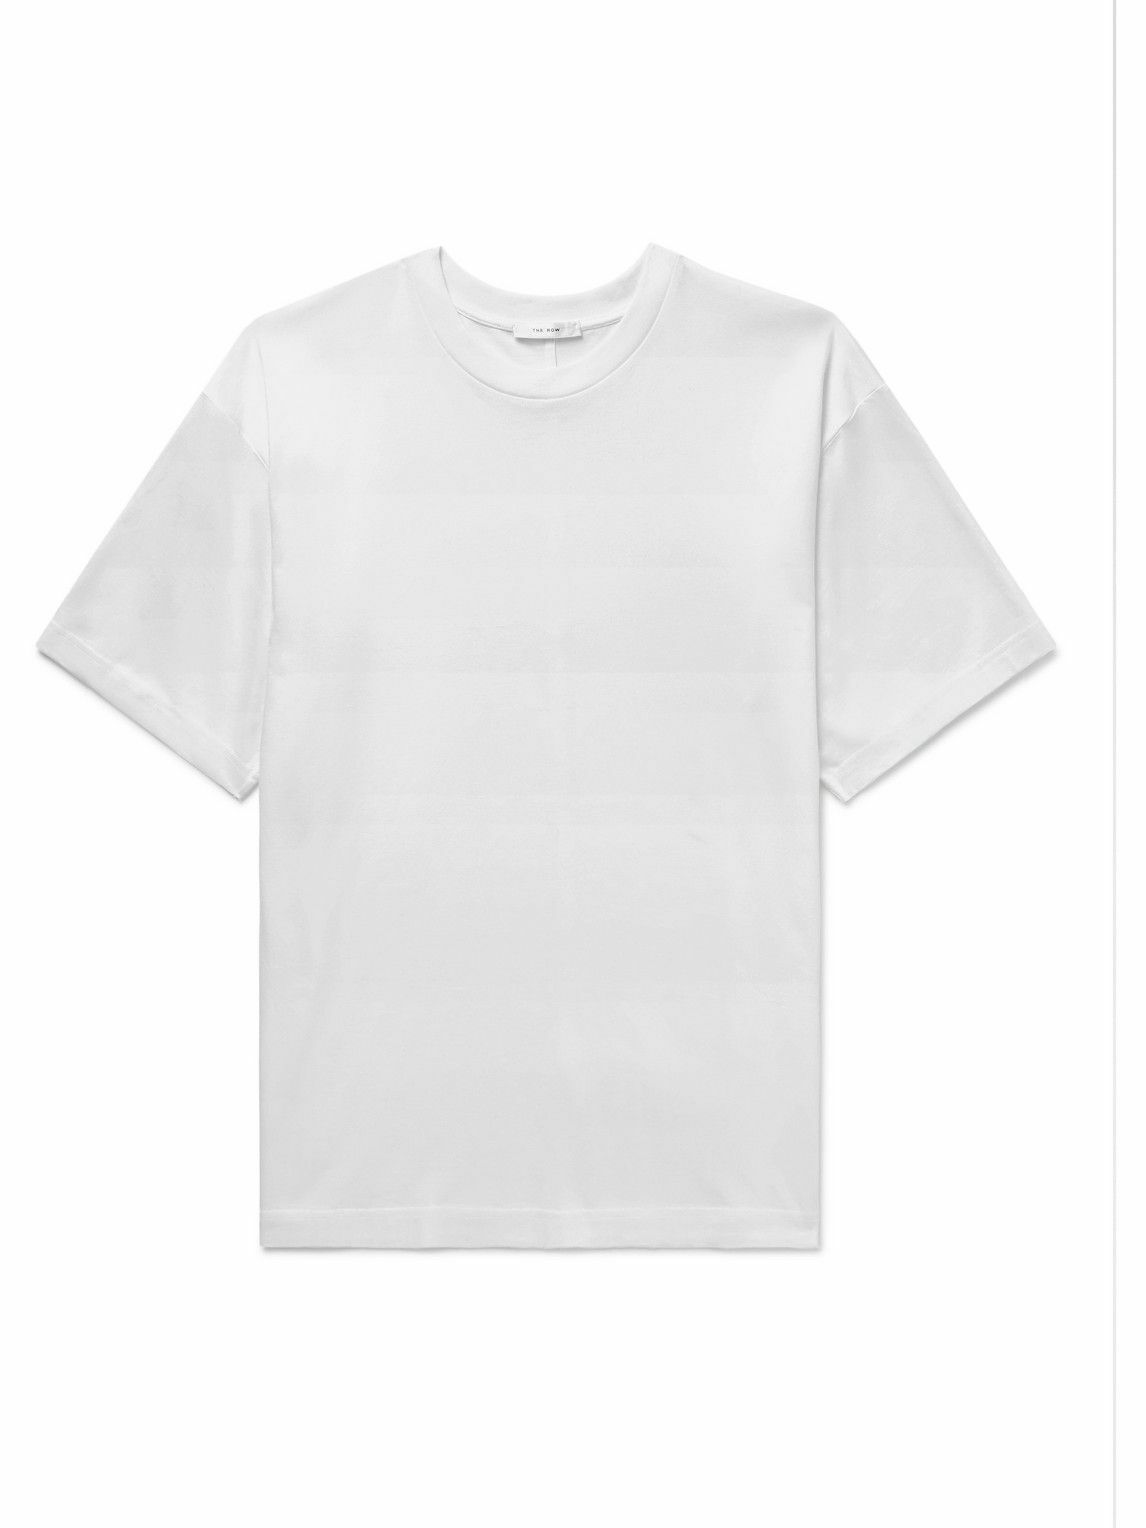 The Row - Nilson Cotton-Jersey T-Shirt - White The Row